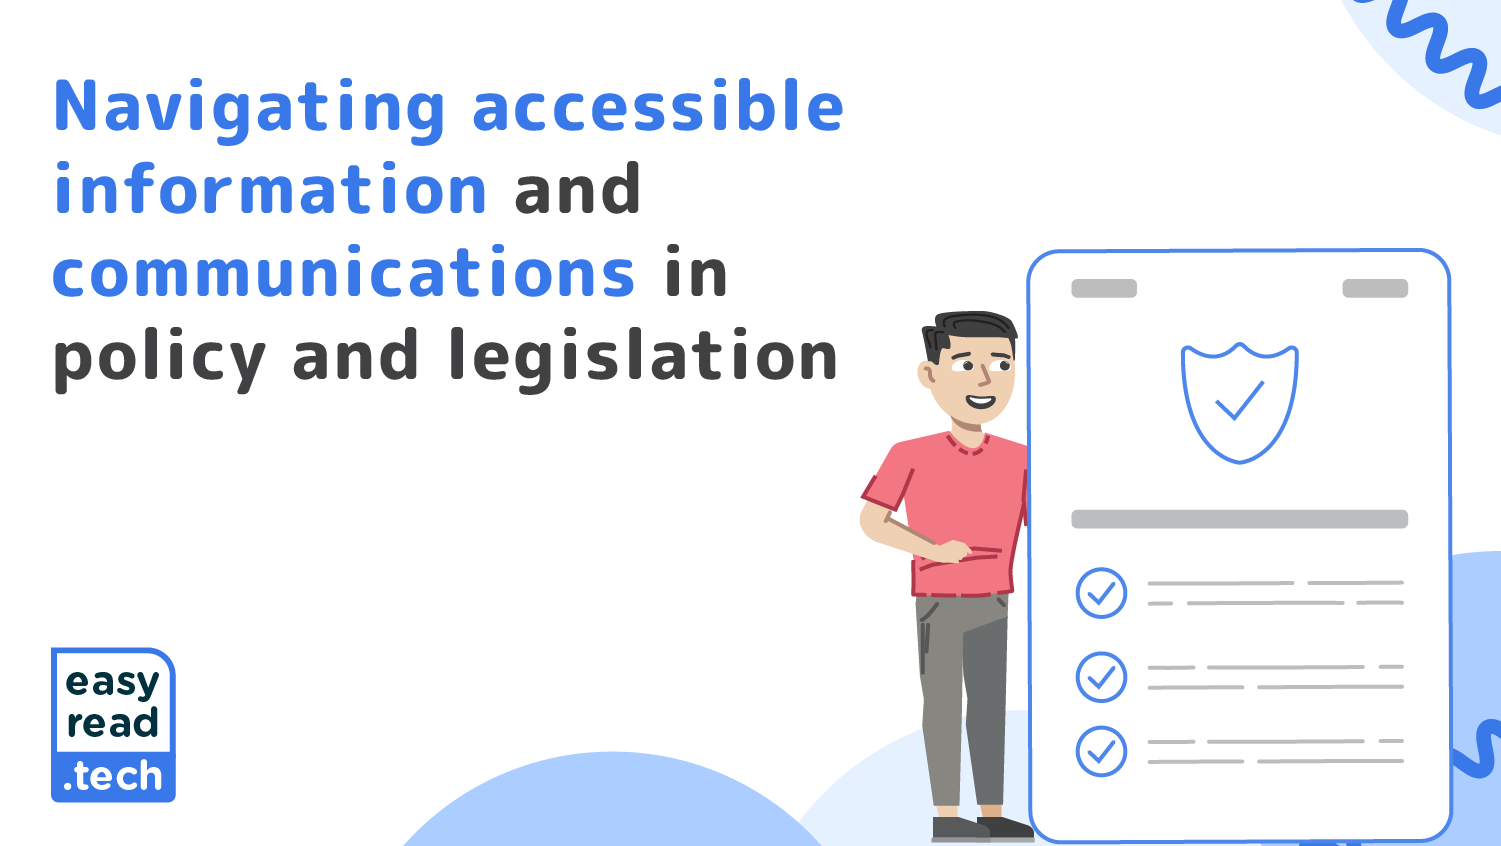 Navigating accessible information and communications in policy and legislation